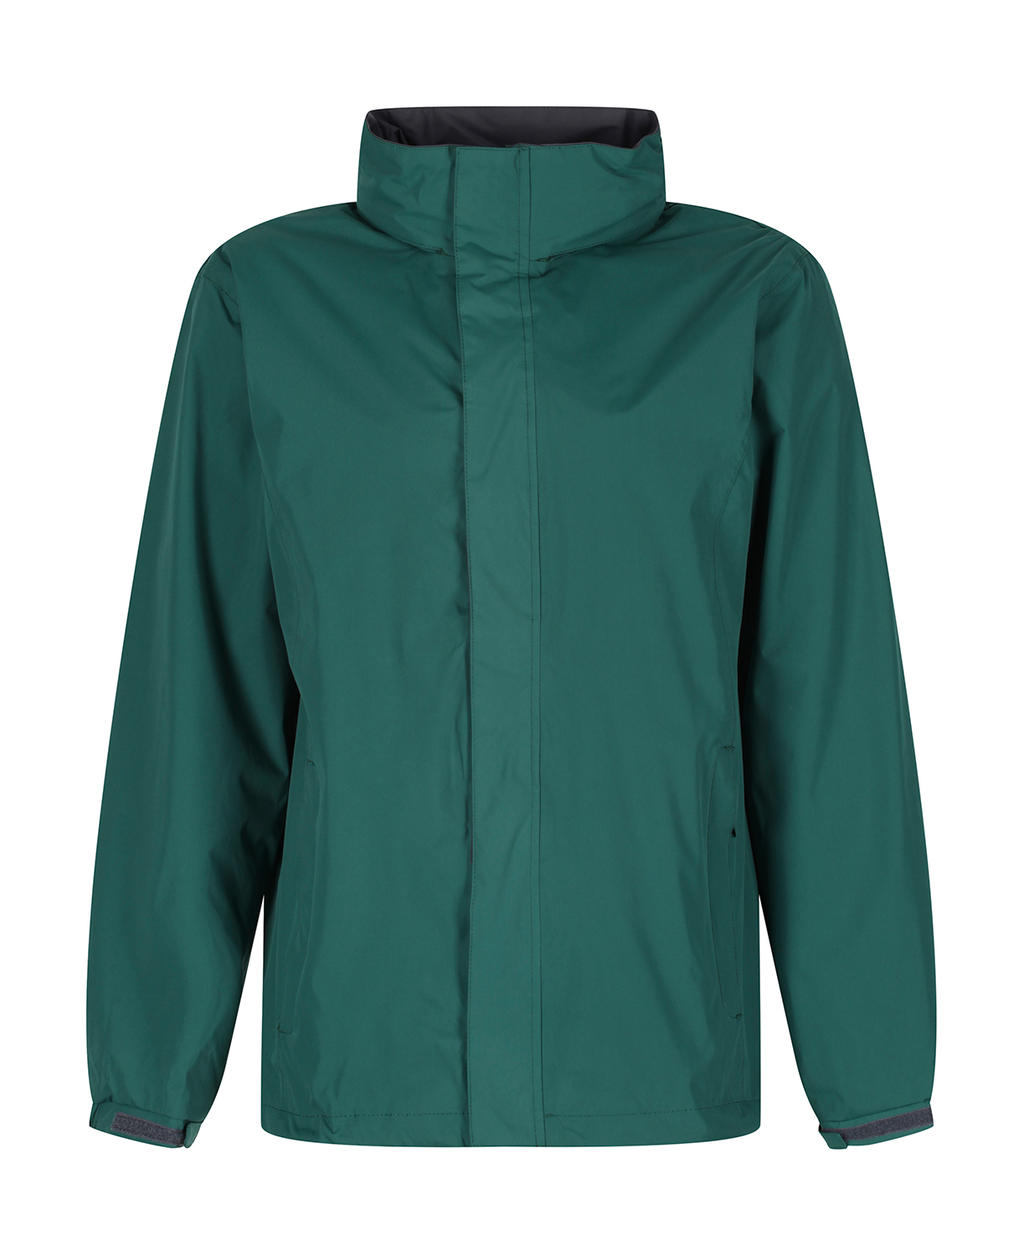  Ardmore Jacket in Farbe Bottle Green/Seal Grey